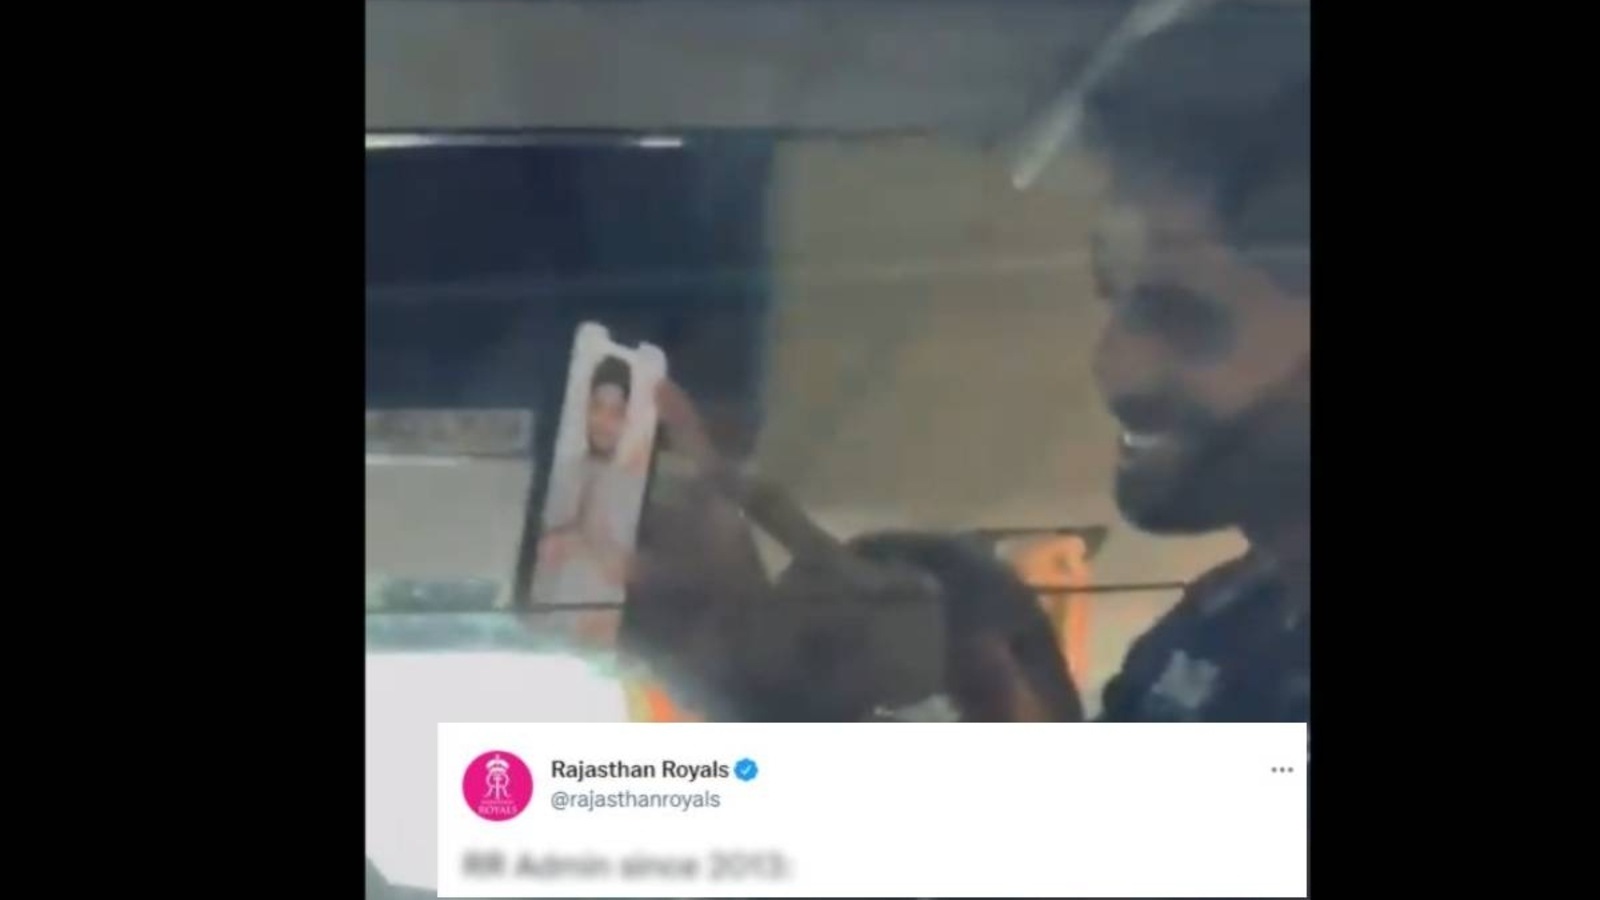 watch-kerala-crowd-goes-wild-as-suryakumar-shows-samson-s-picture-on-his-mobile-rajasthan-royals-caption-is-pure-gold